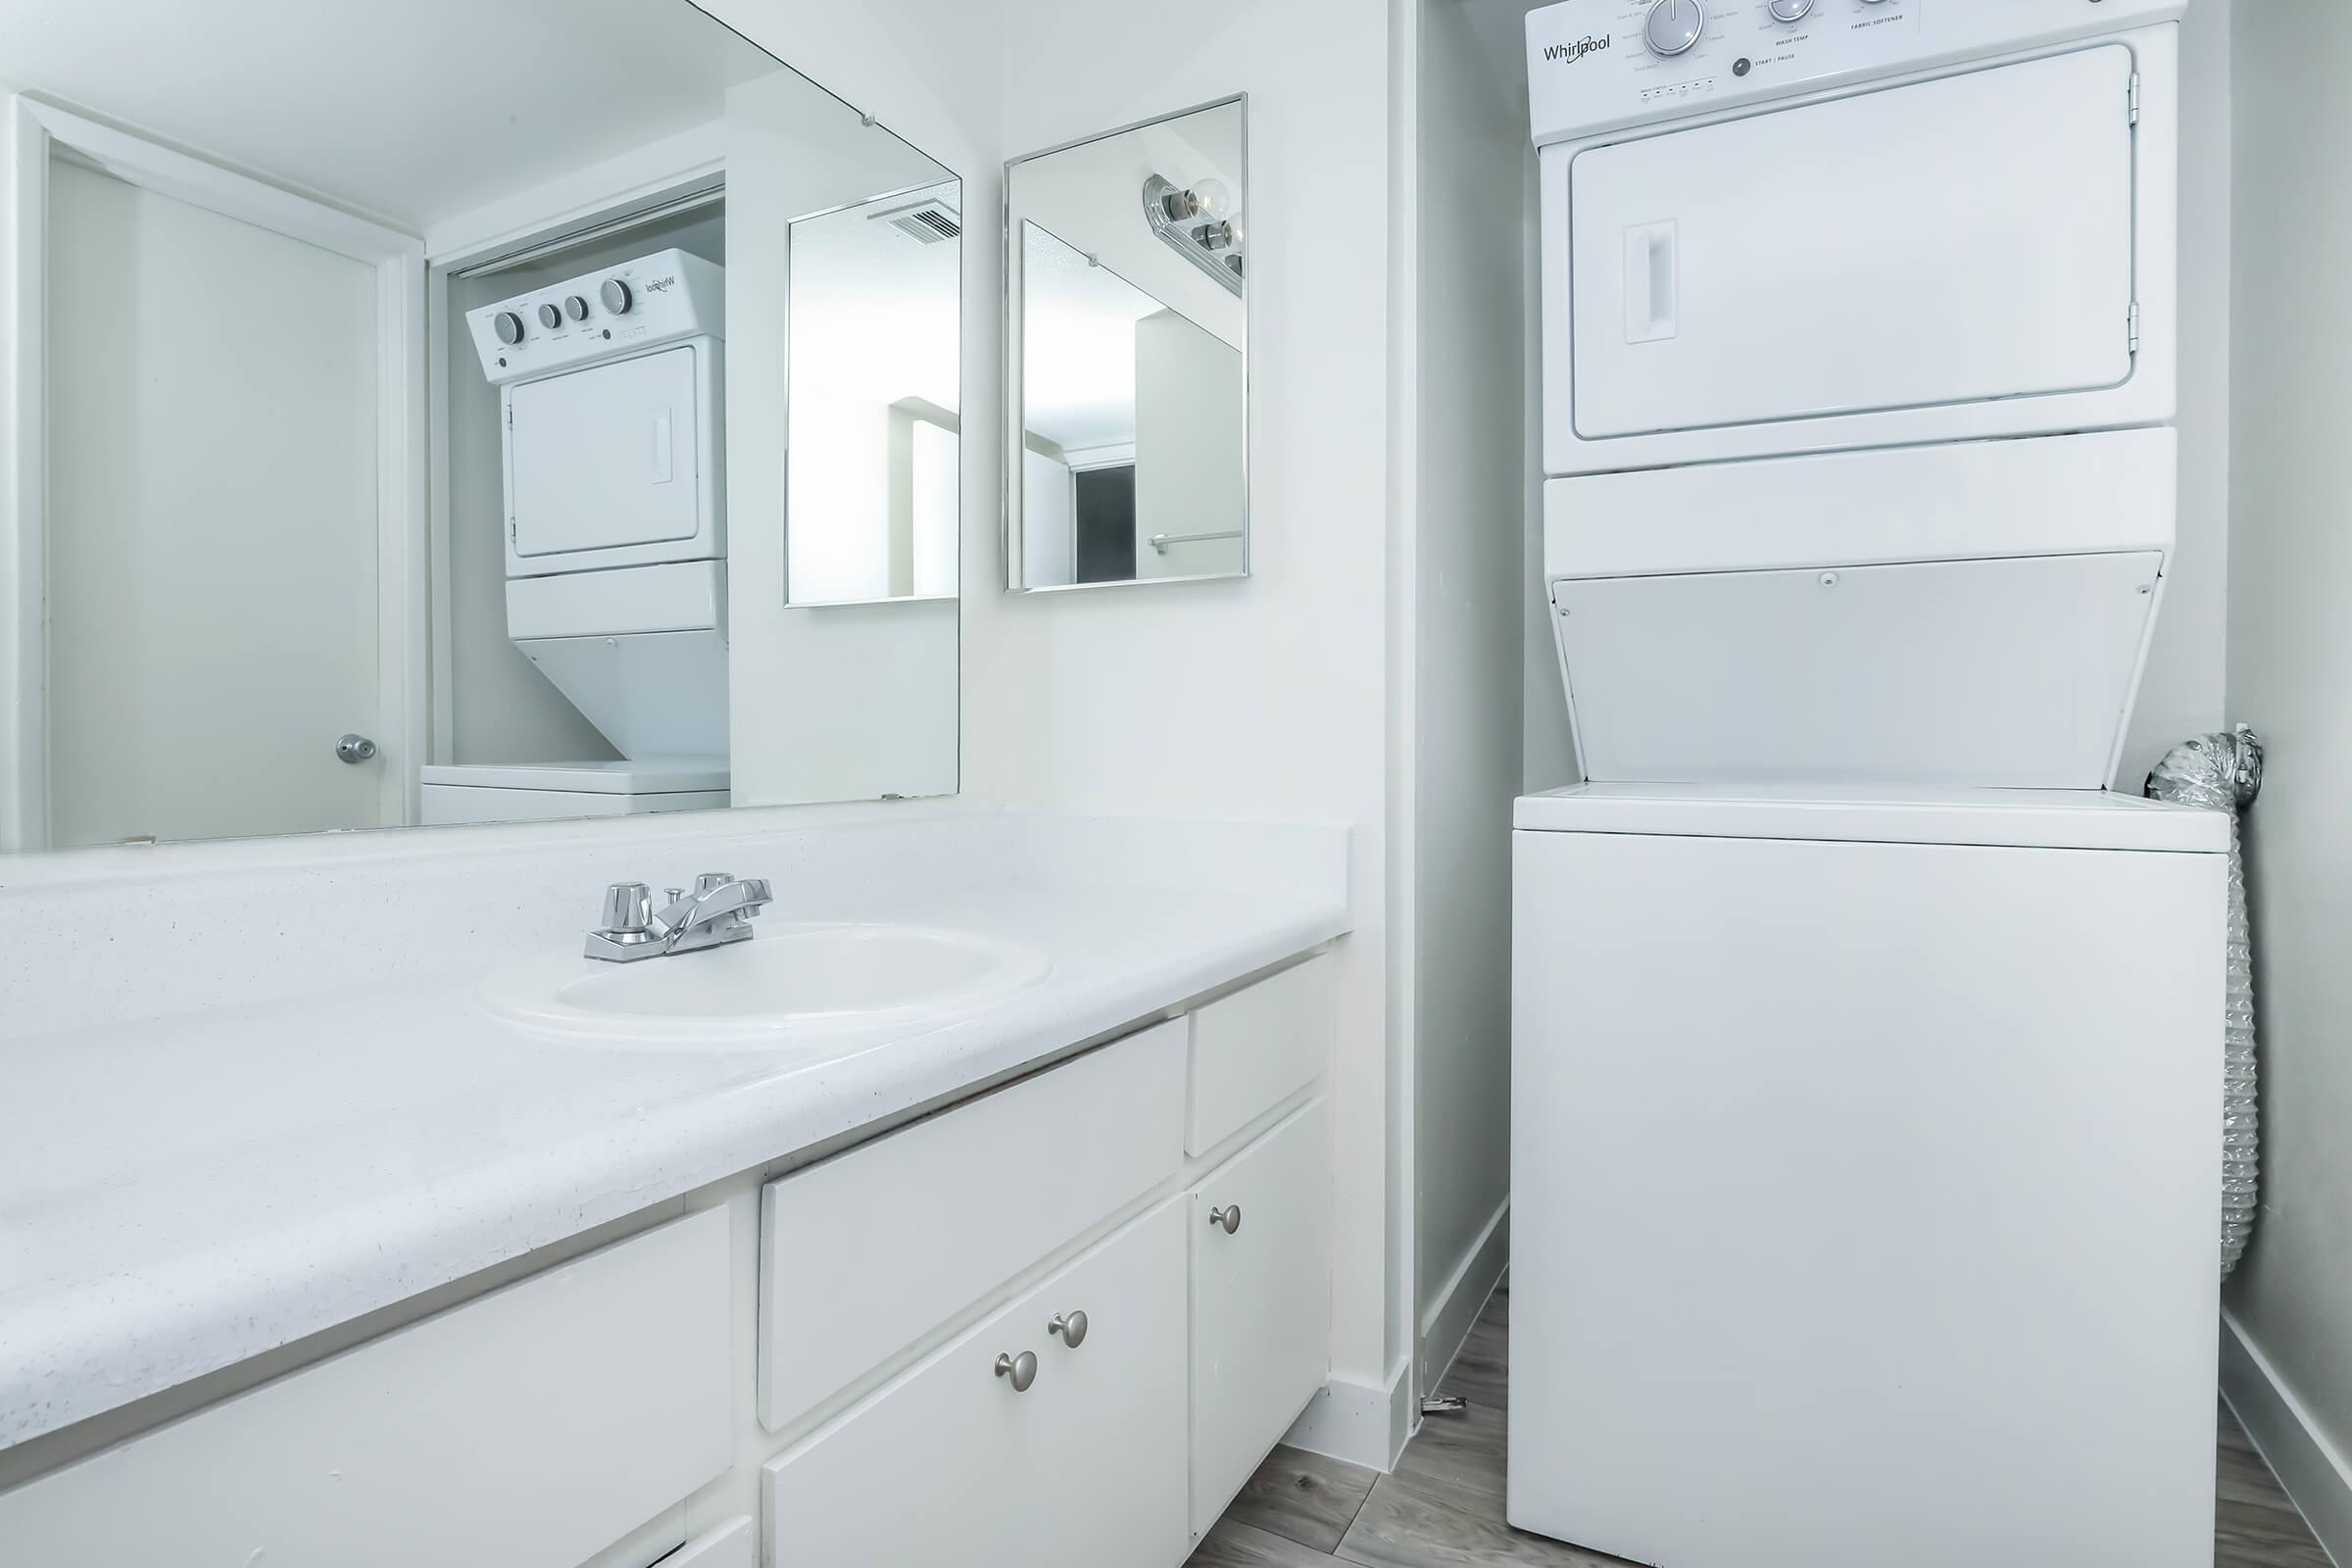 A bathroom with a washer and dryer at Rise at the Meadows.